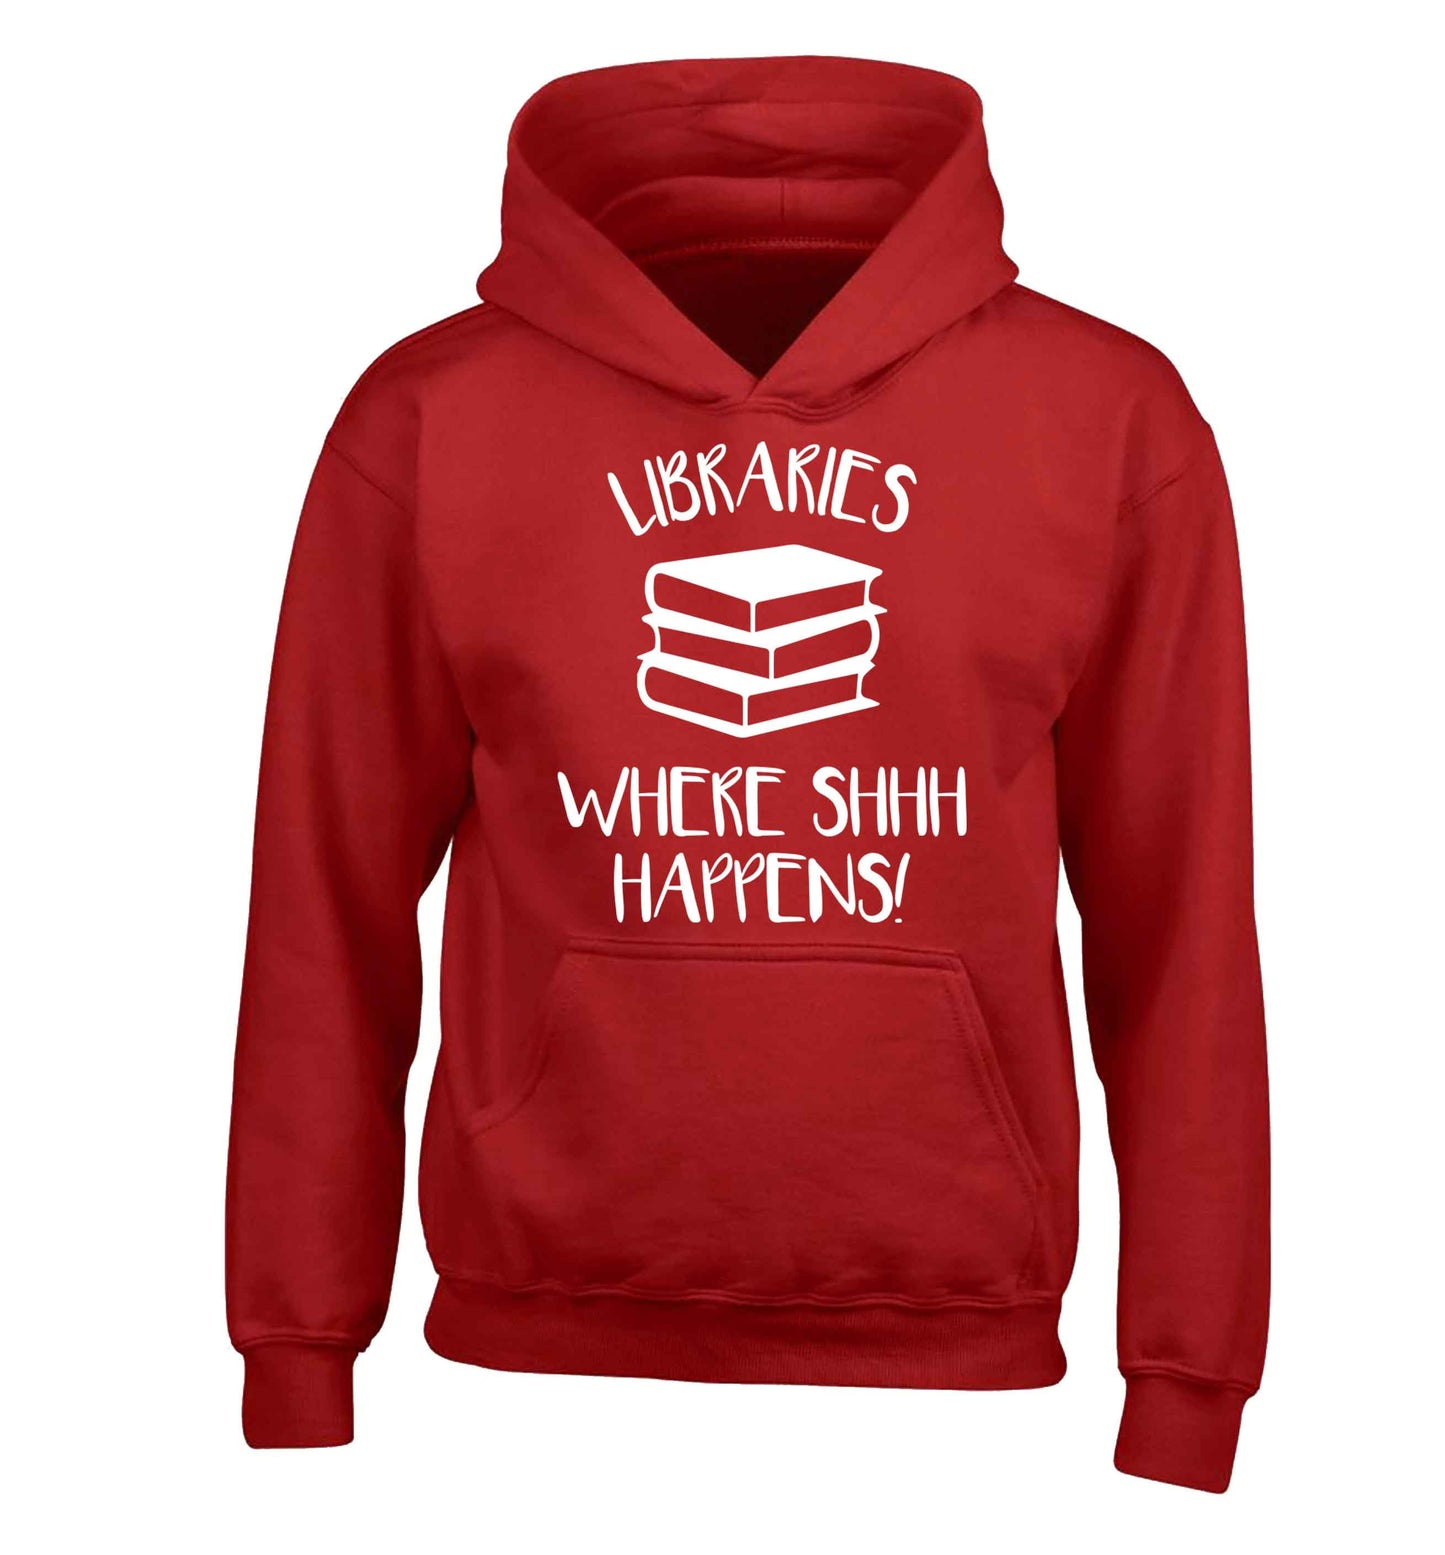 Libraries where shh happens! children's red hoodie 12-13 Years